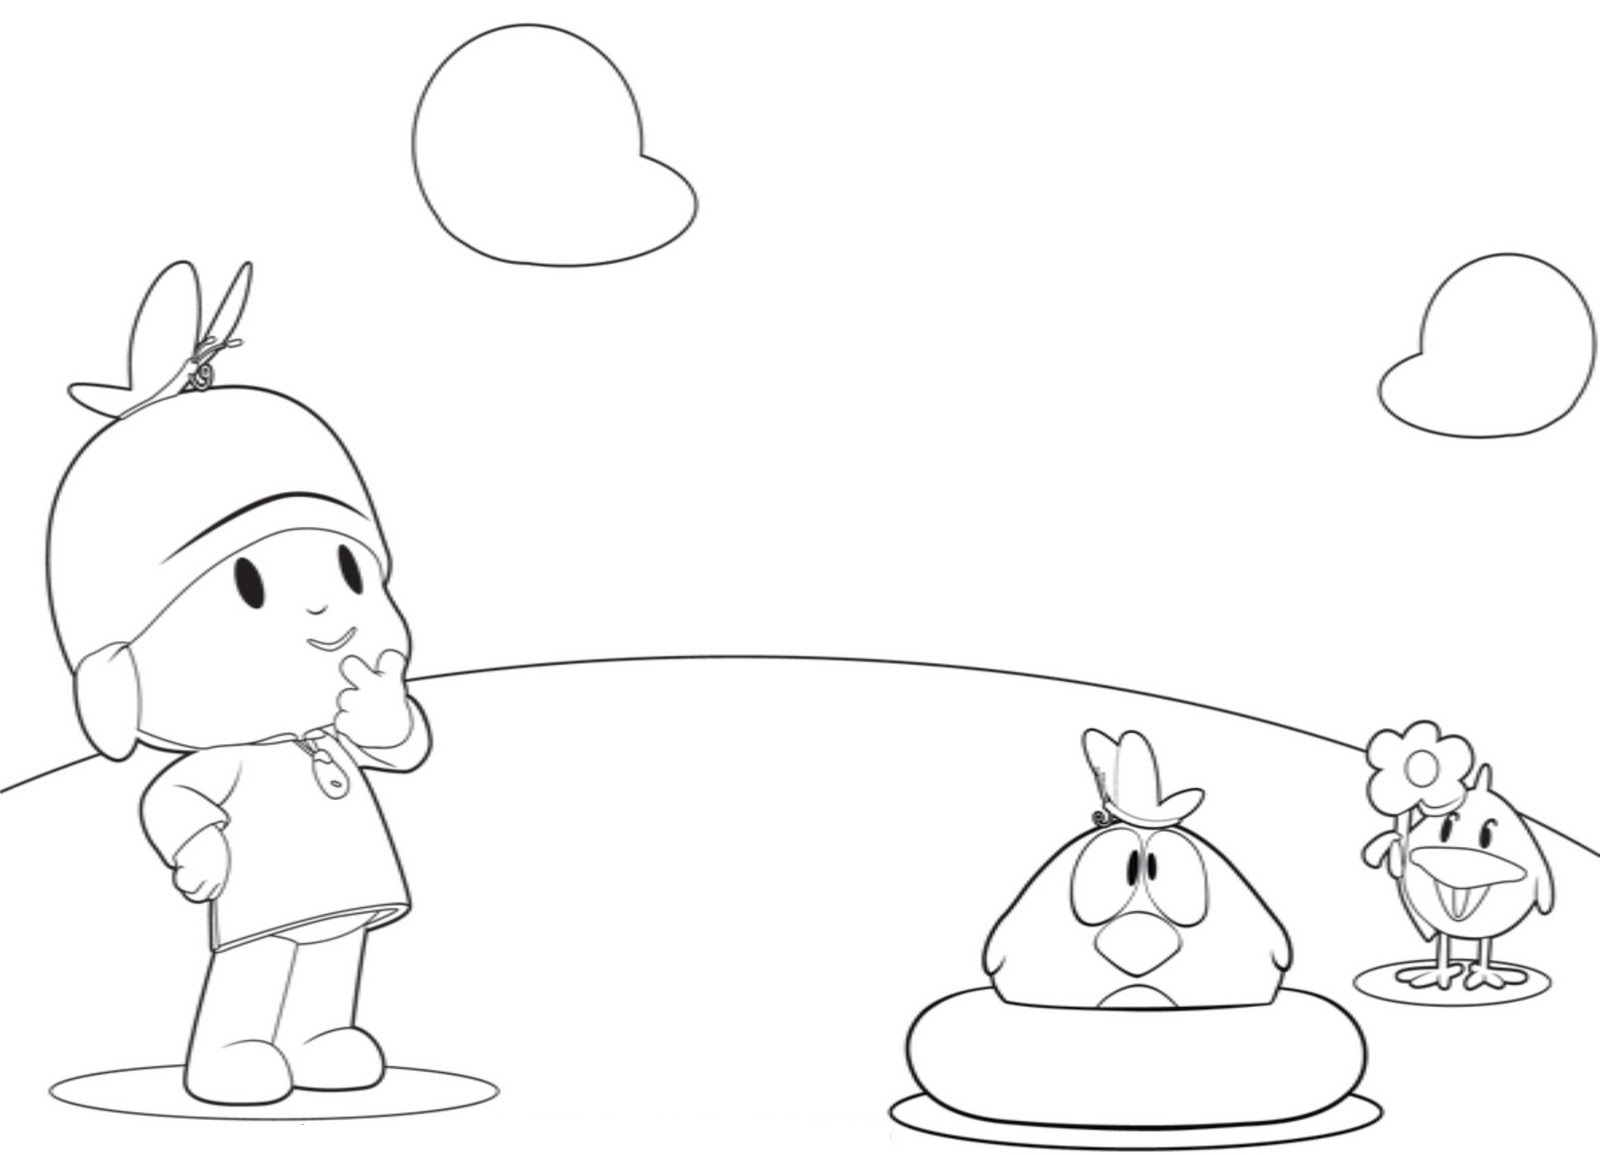 Cut Pocoyo Coloring Page  Coloring pages, Coloring pages for kids,  Printable coloring pages